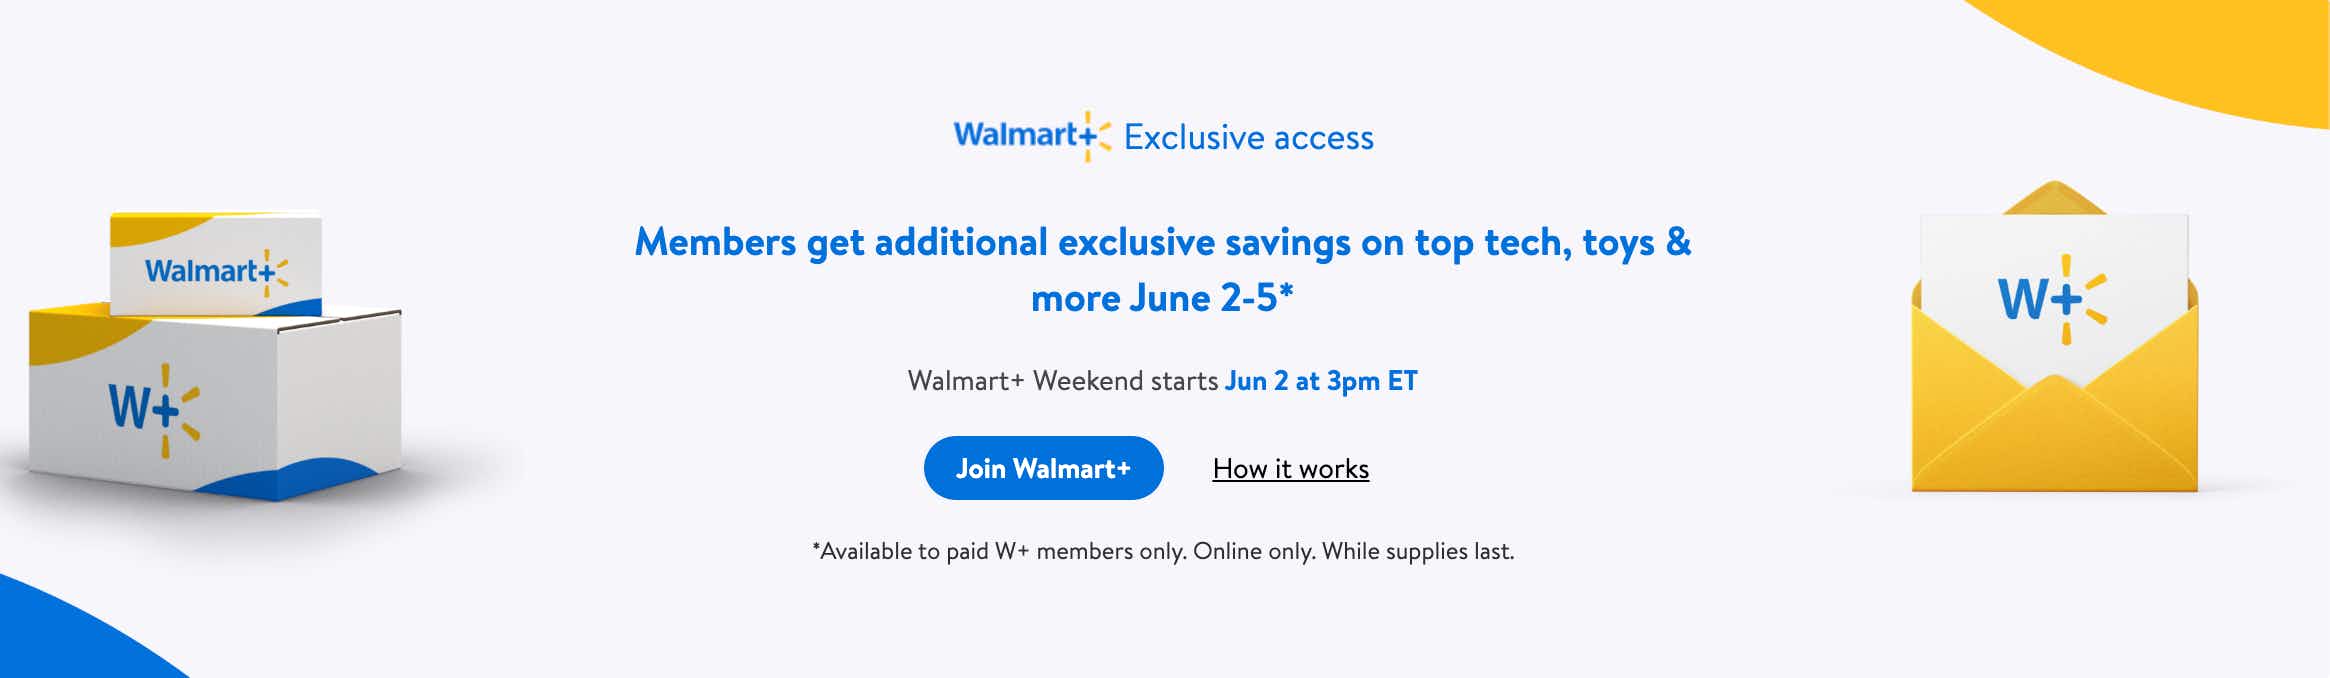 Walmart Plus Weekend Early Access announcement